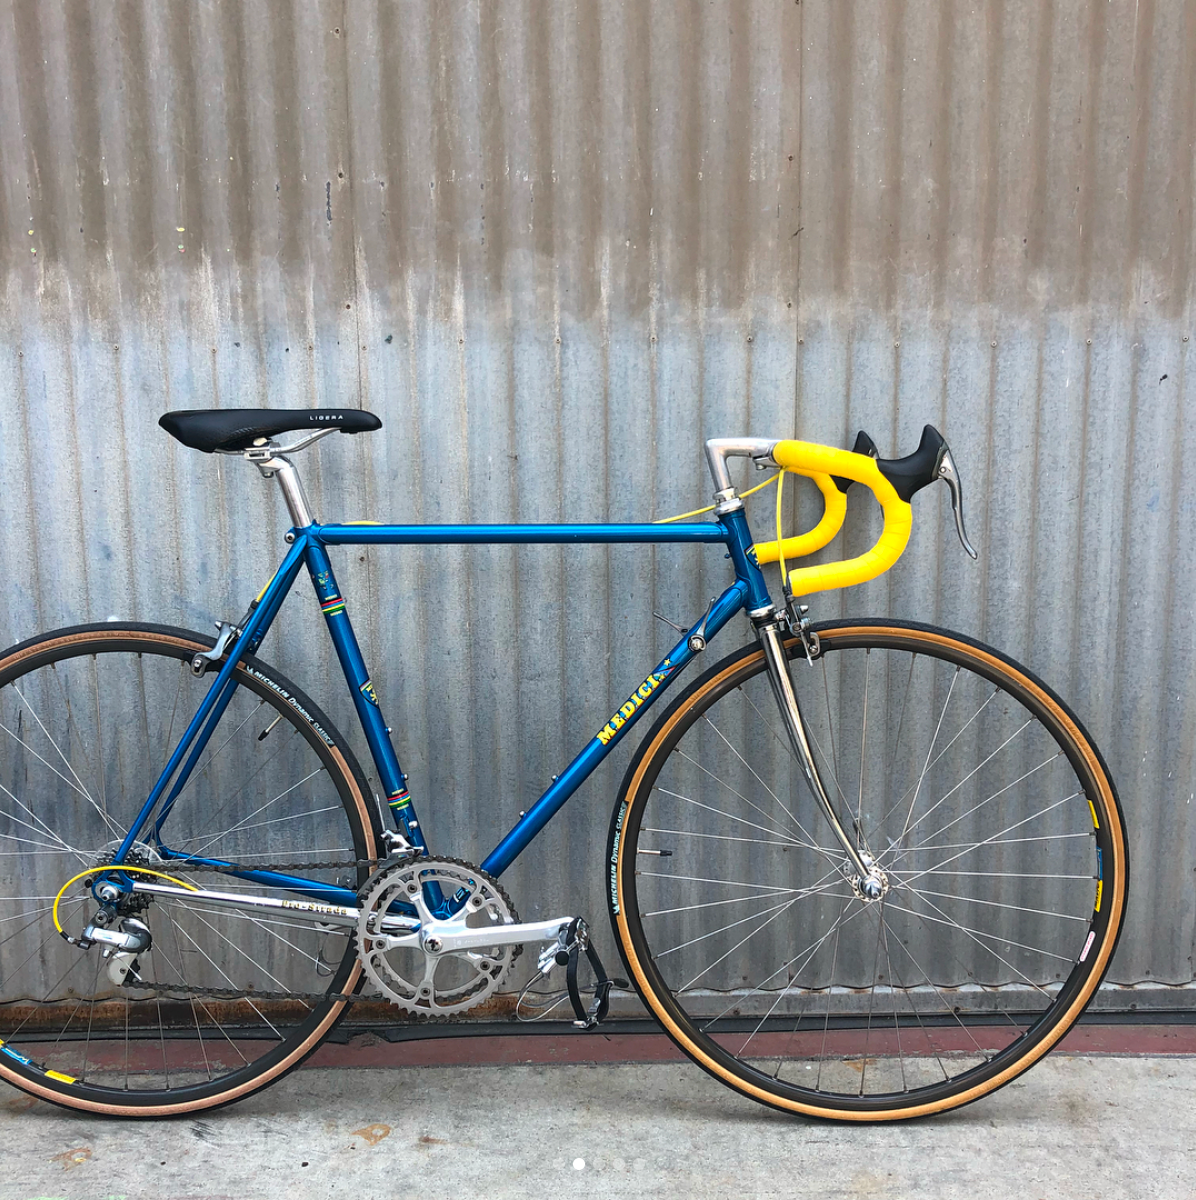 Medici - Classic L'Eroica Road Bike in 55 CM - Built with Shimano 600 Tri-Color Components